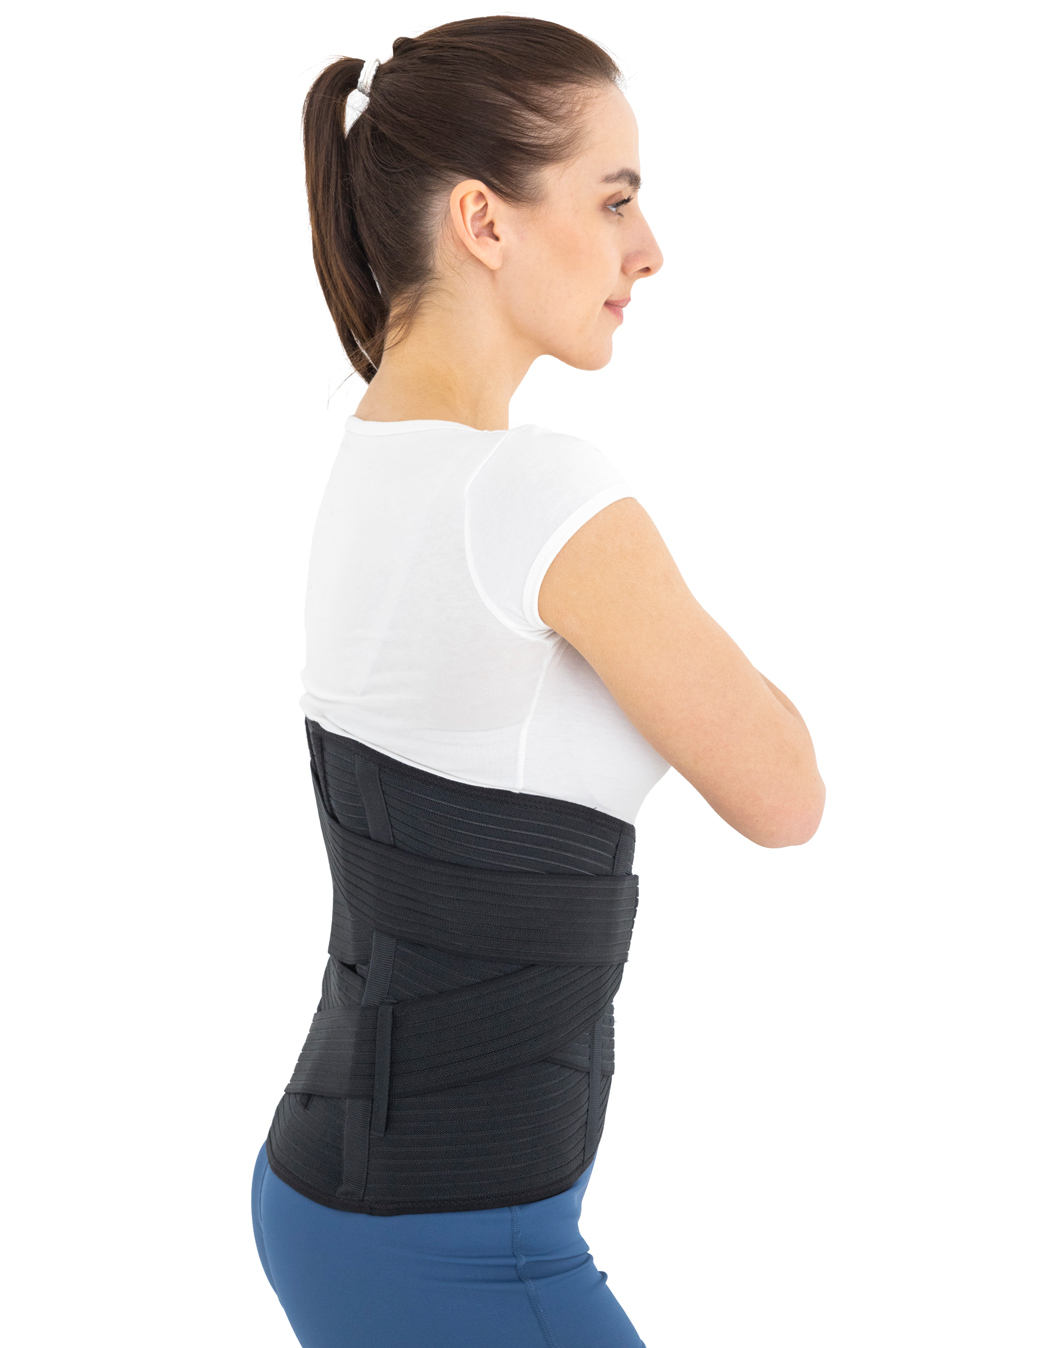 LumboLoc® Back Brace, Supports and orthoses, Medical aids